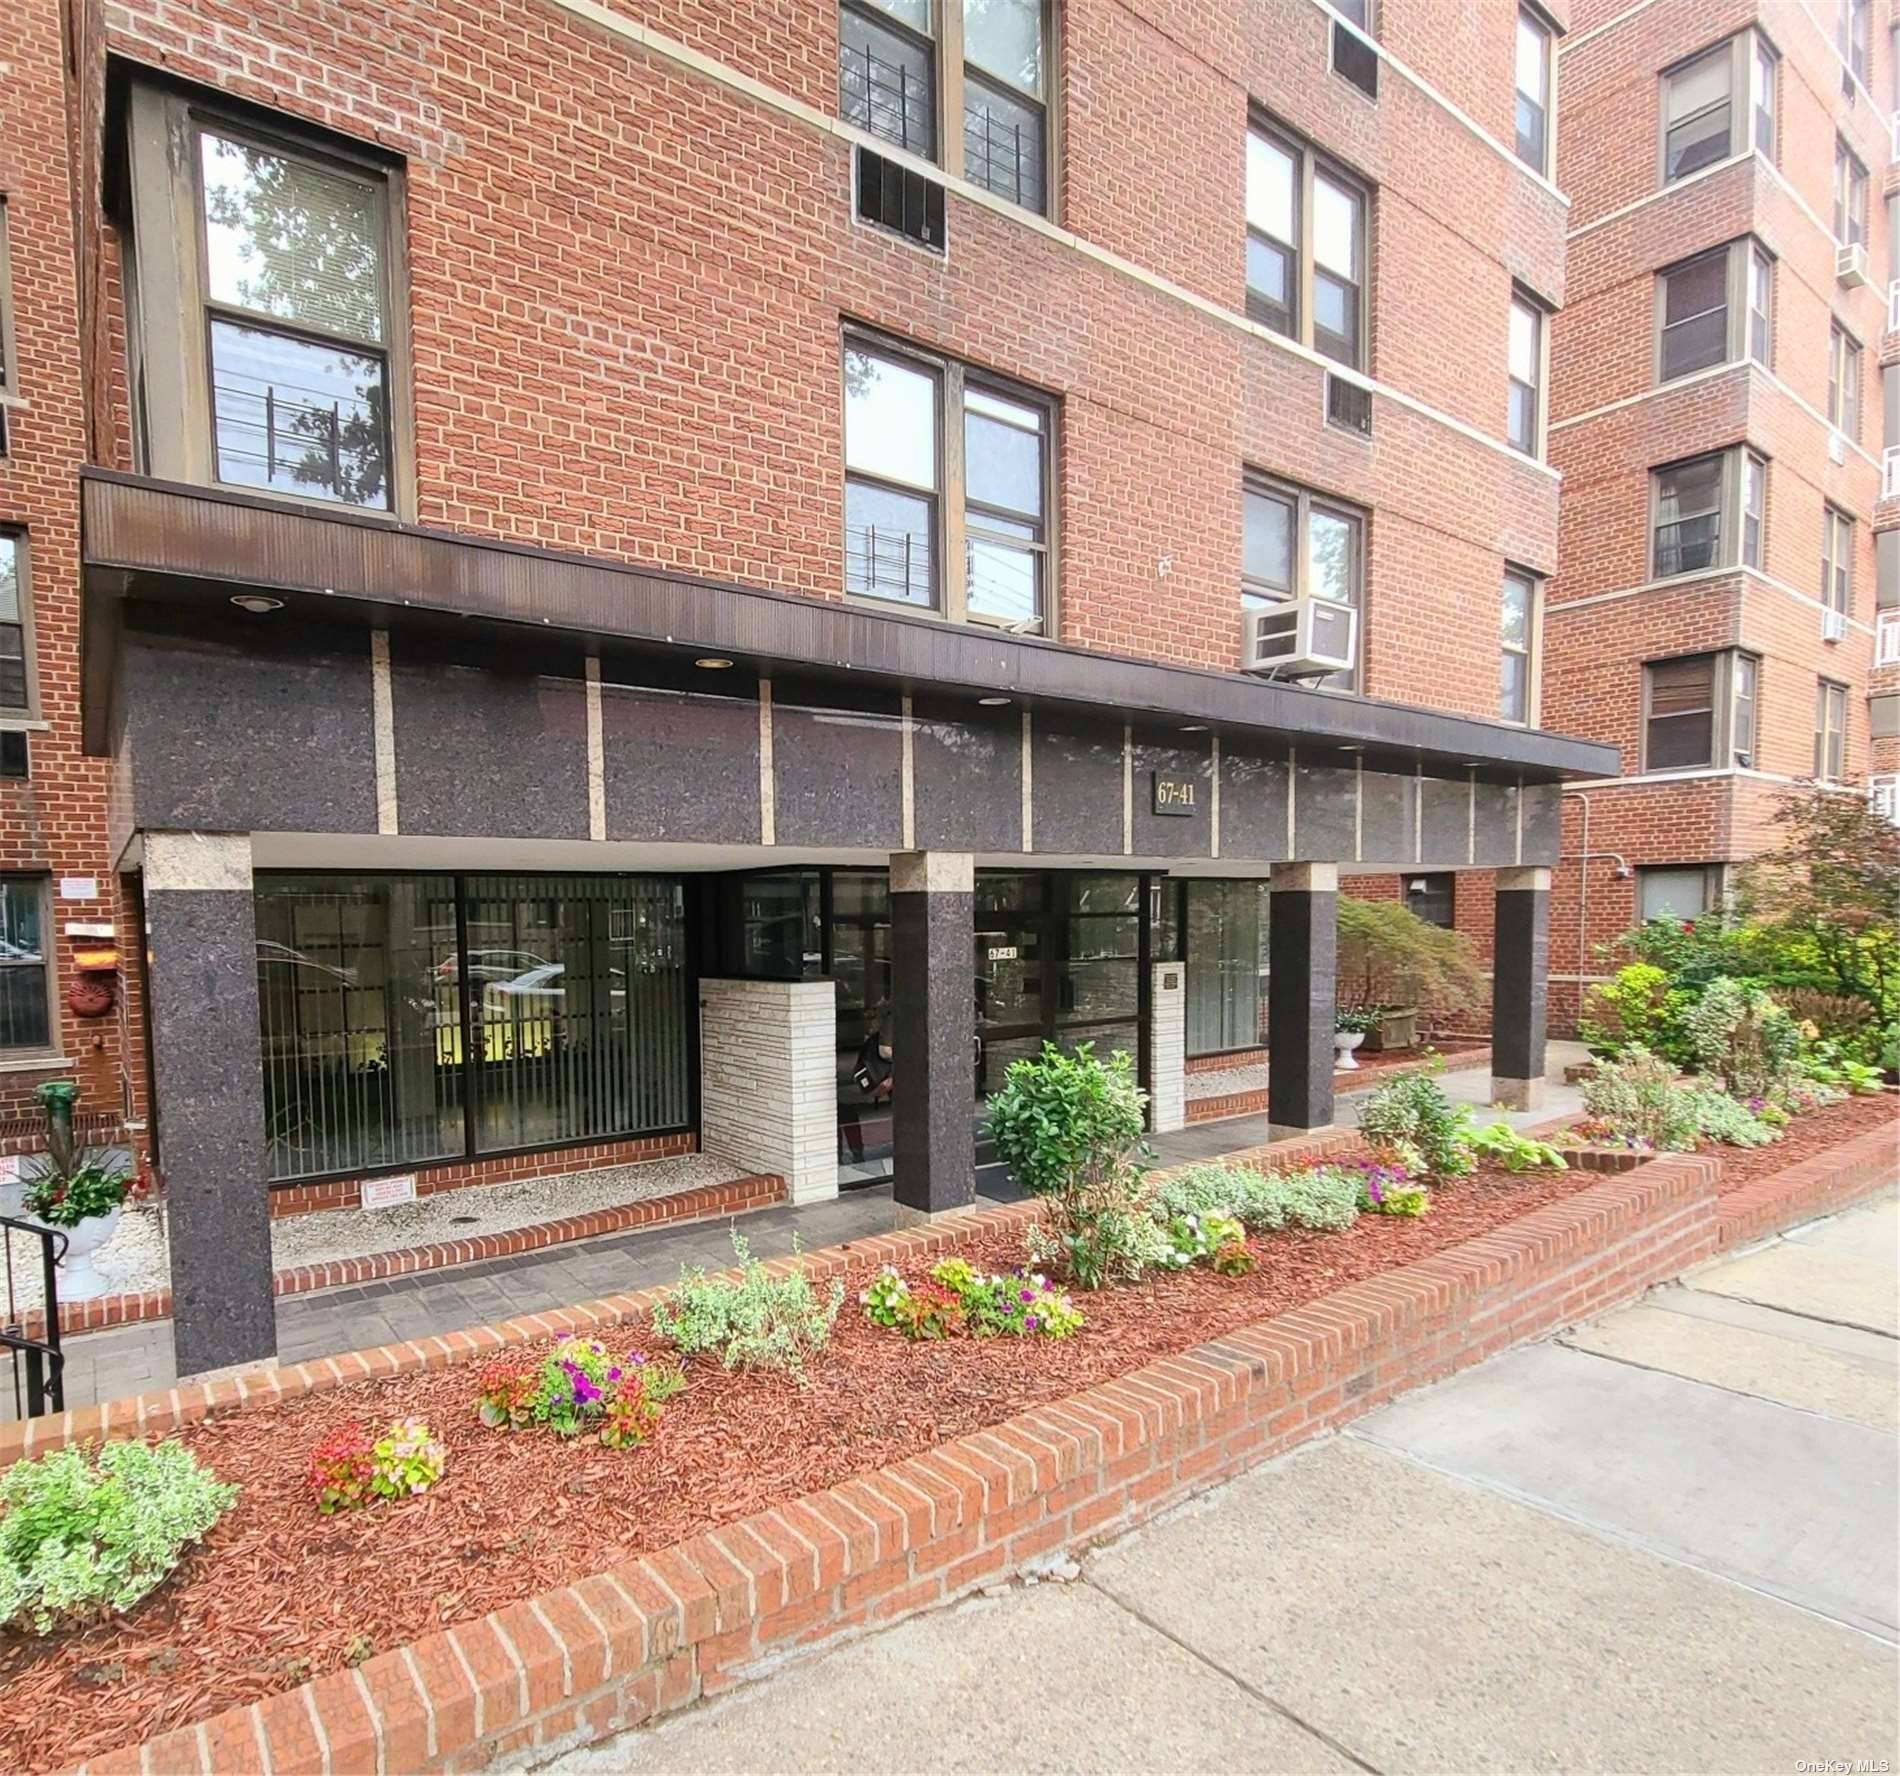 Super Deal for Sunny XLG 1Br Co op in Prime Forest Hills Near Subway Eastern Exposure, Very Spacious, Excellent Location, Fine Building, Very Low Maintenance, Amazing Value !